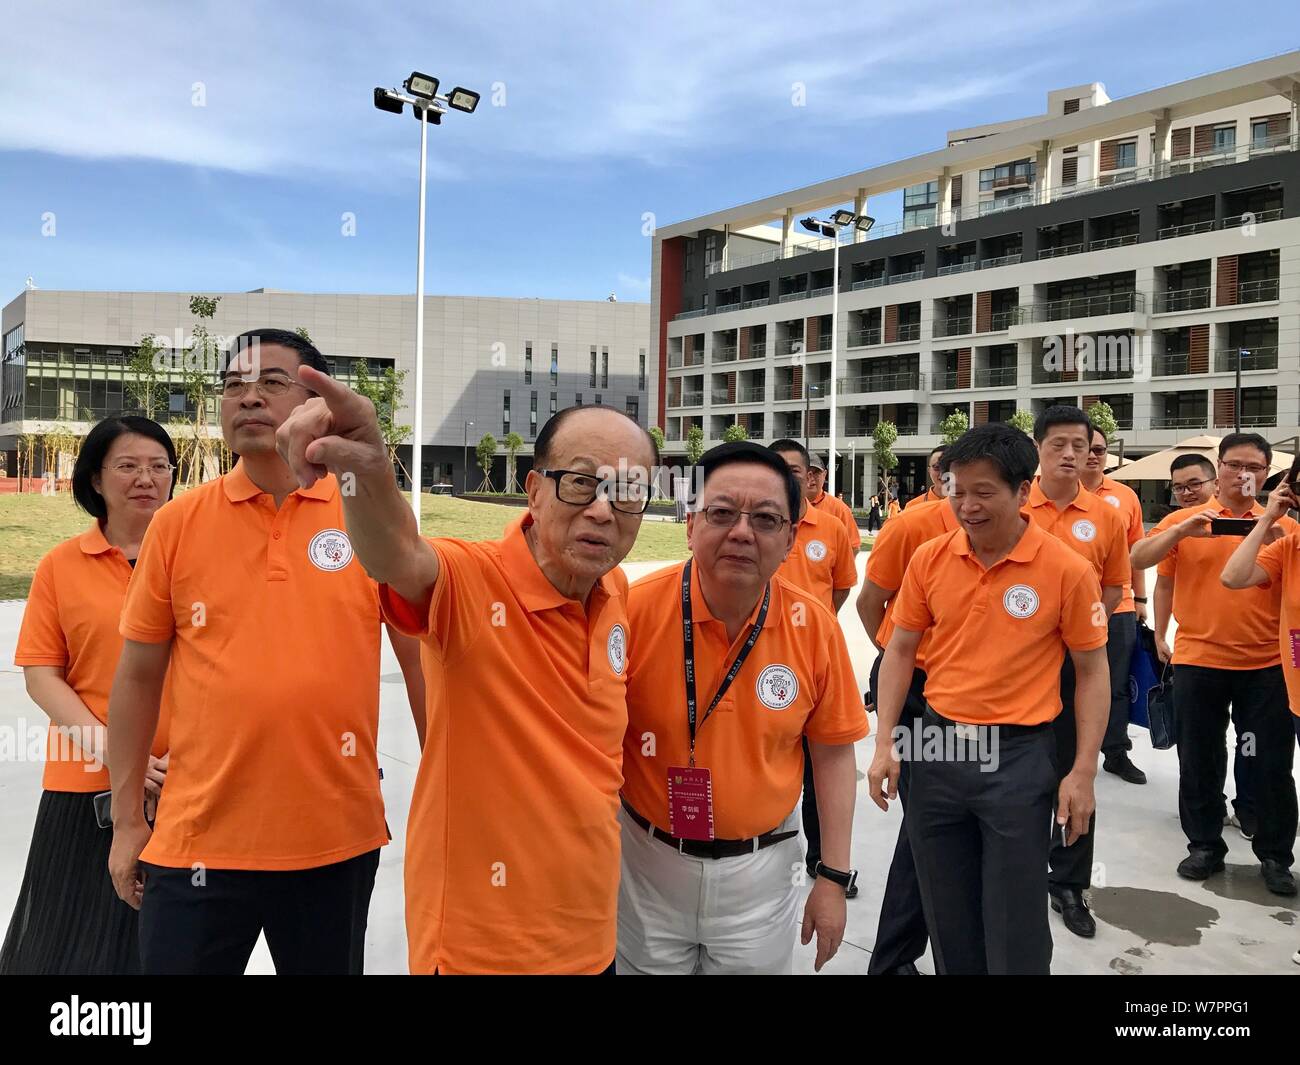 Li Ka-shing, Chairman of CK Hutchison Holdings, third left, visits the Guangdong Technion-Israel Institute of Technology, commonly shortened to Guangd Stock Photo